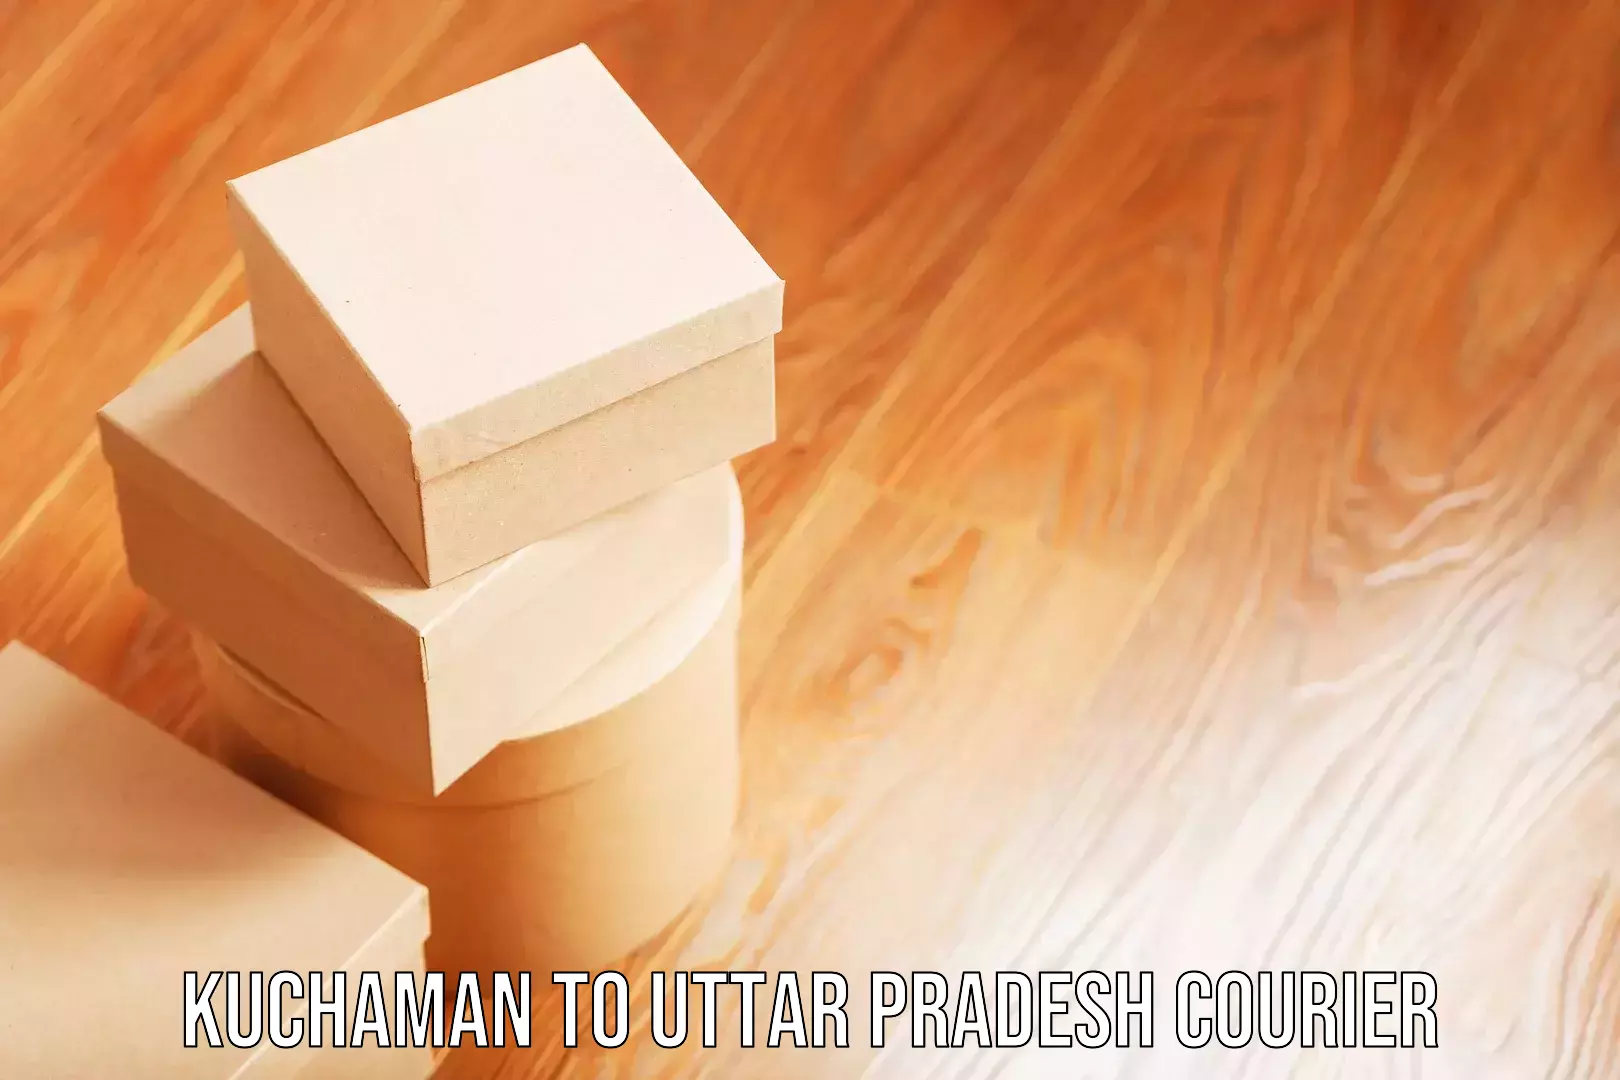 Instant baggage transport quote Kuchaman to Marihan